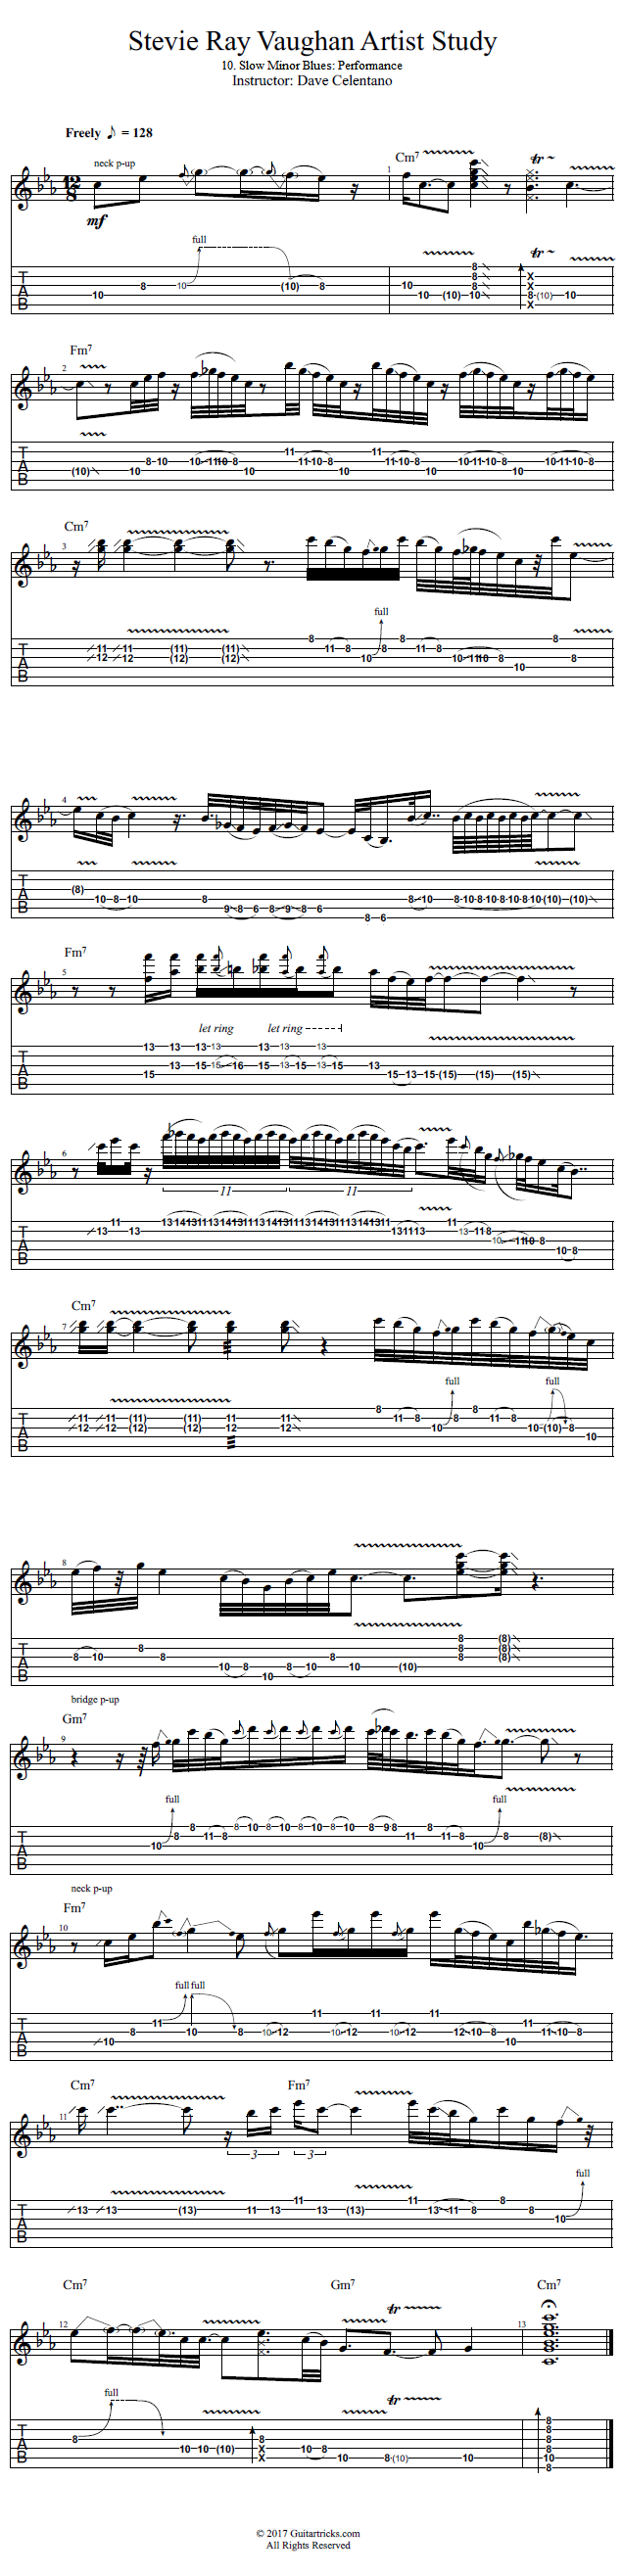 Slow Minor Blues: Performance song notation